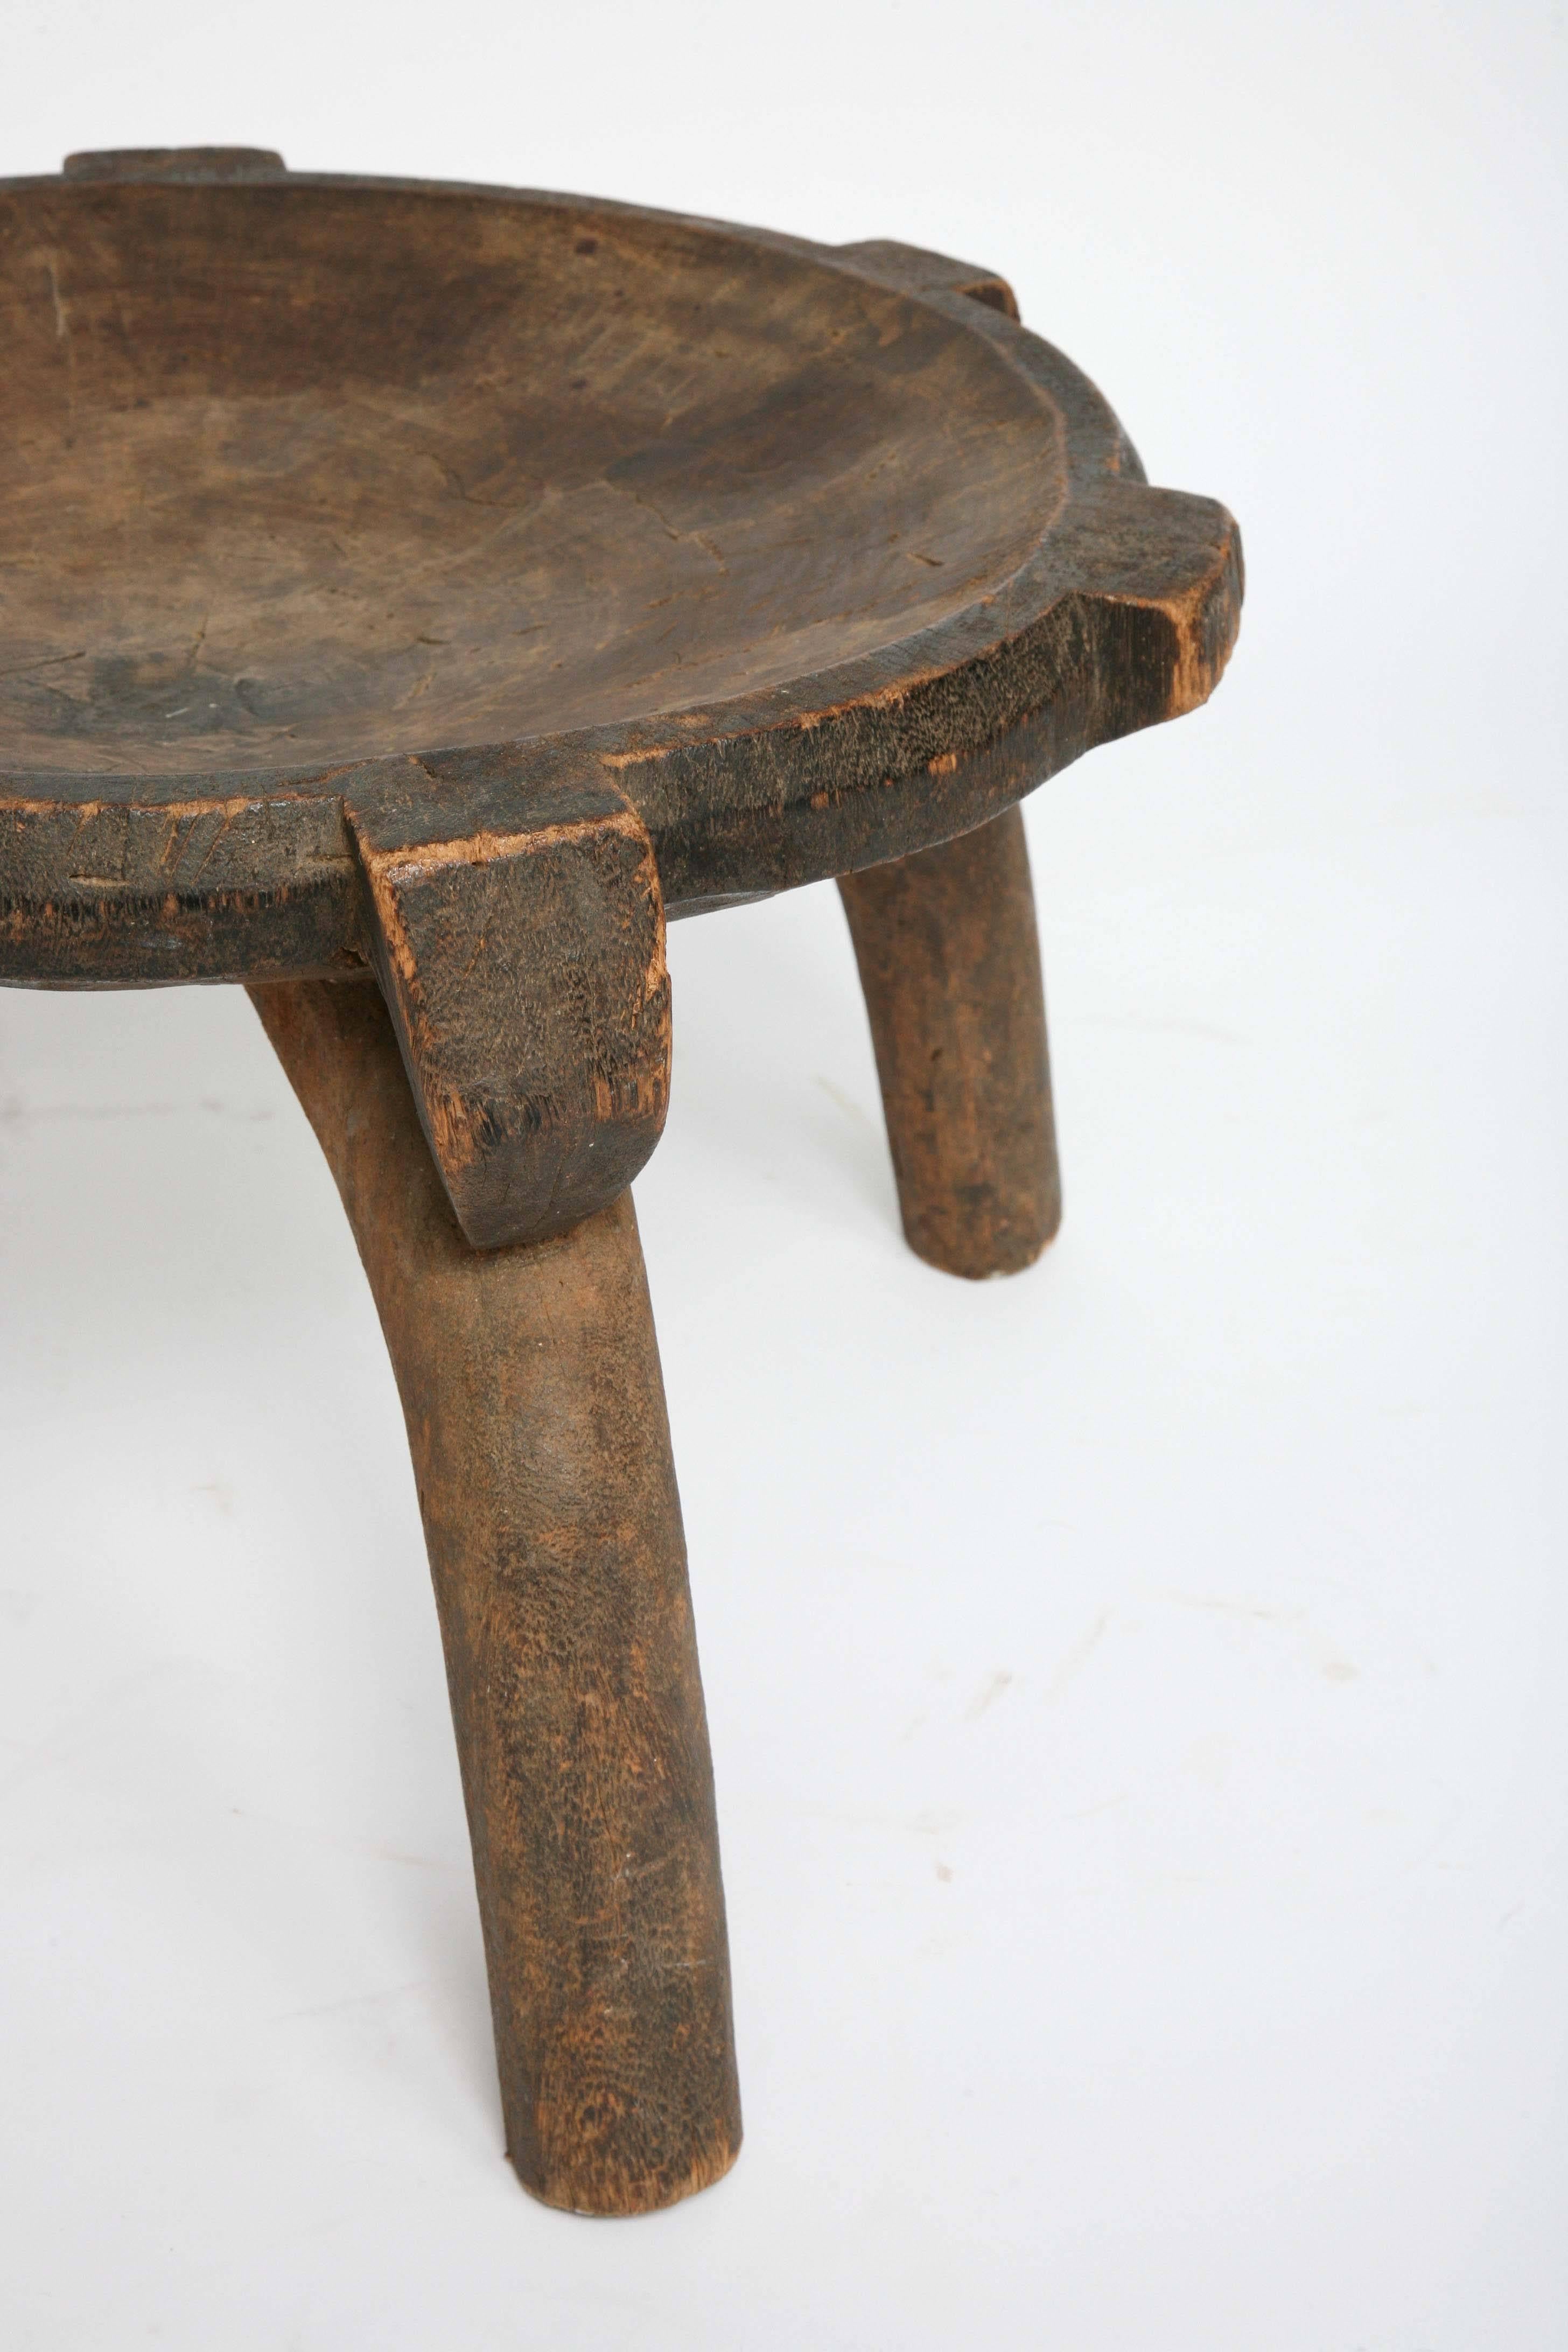 Three African Stools, Ethiopian, Hand-Carved, with Distinct Differences 1